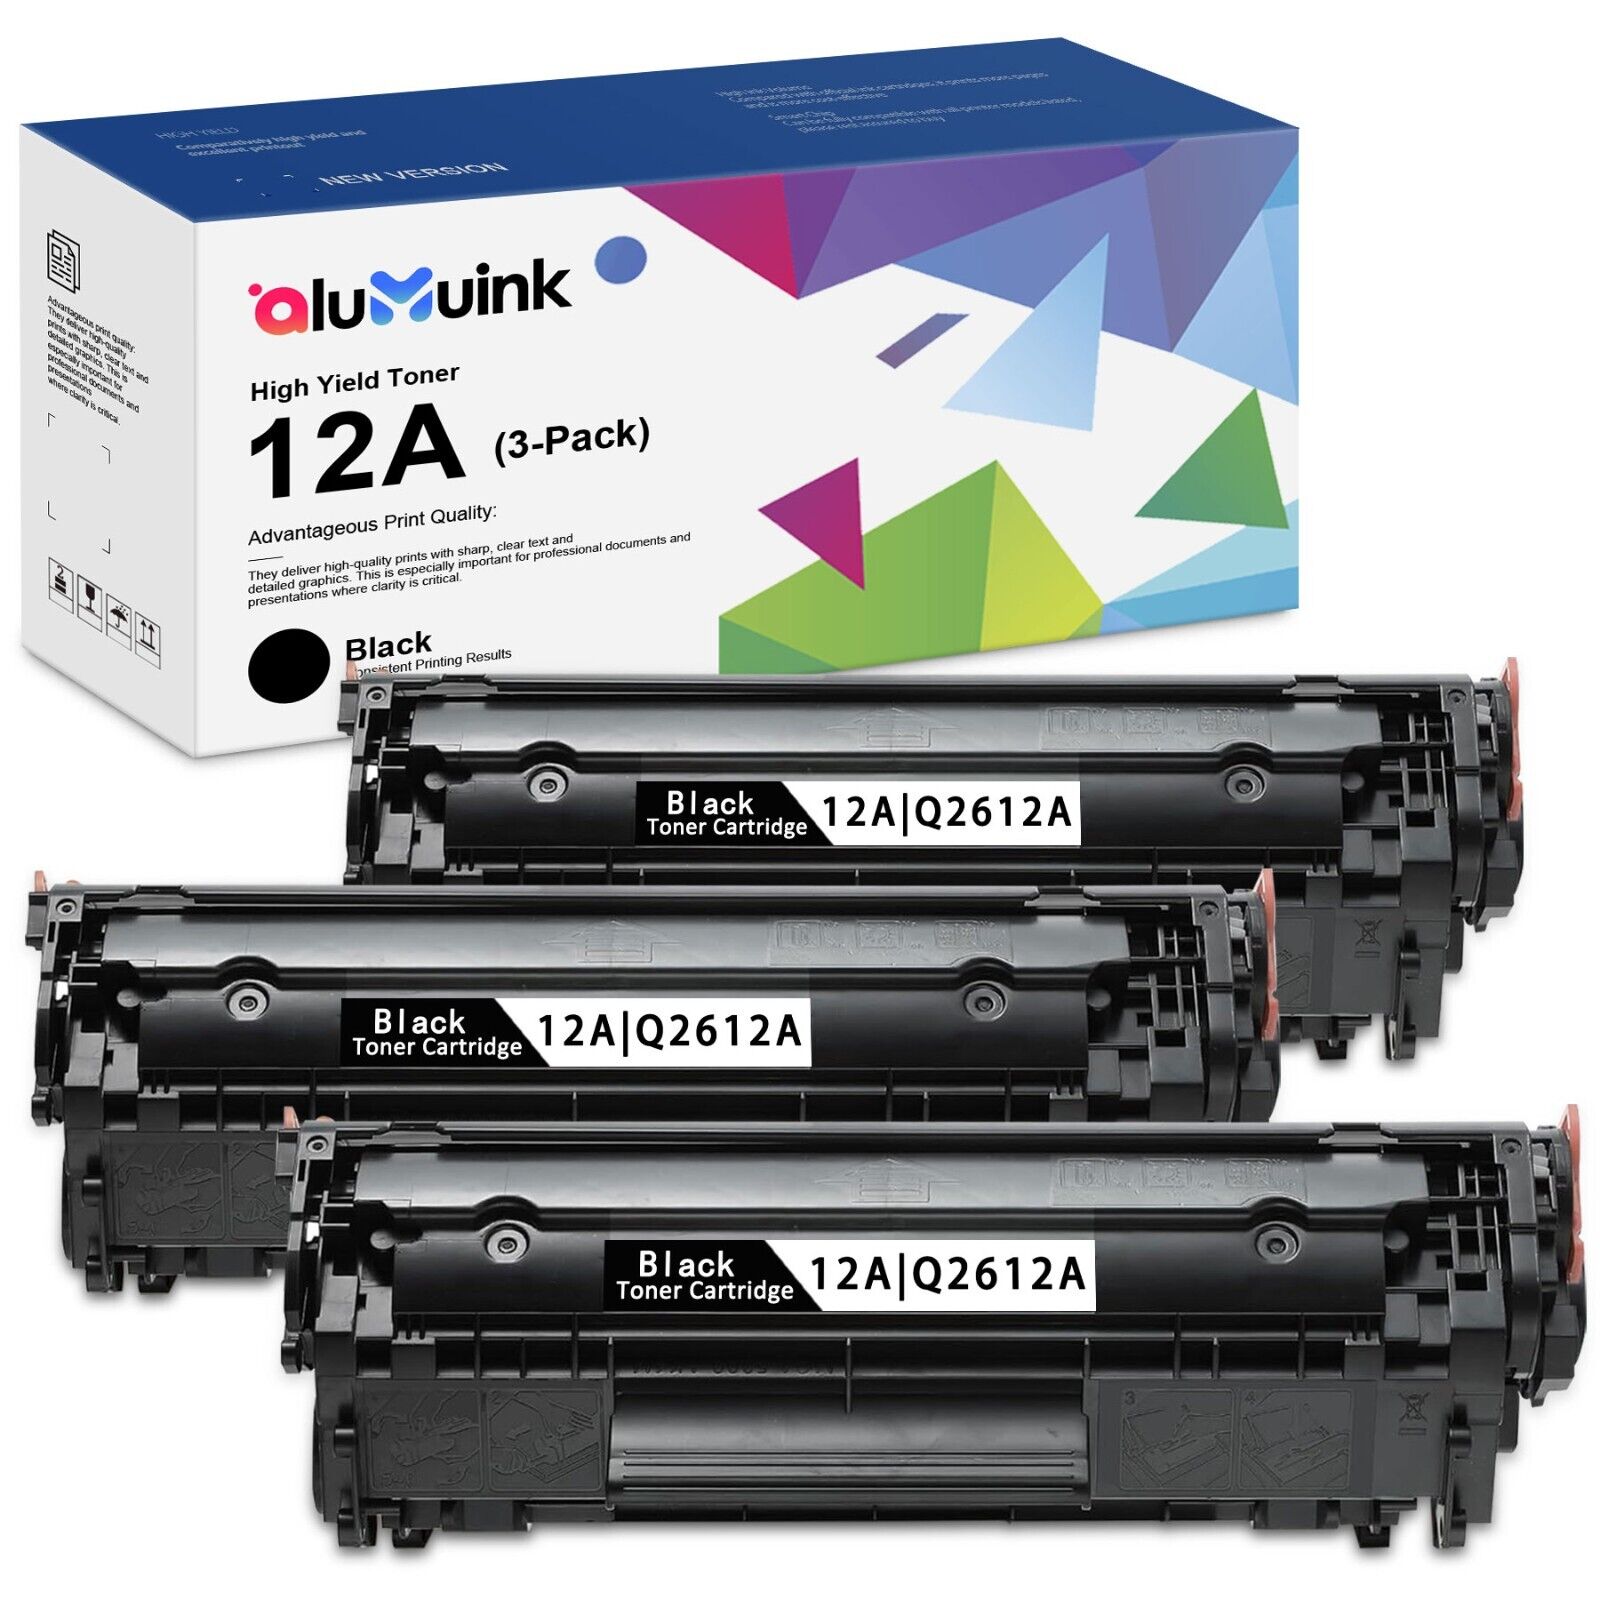 12A Black Toner Cartridge (3-pack) Replacement for HP 12A Toner 3050 3050z